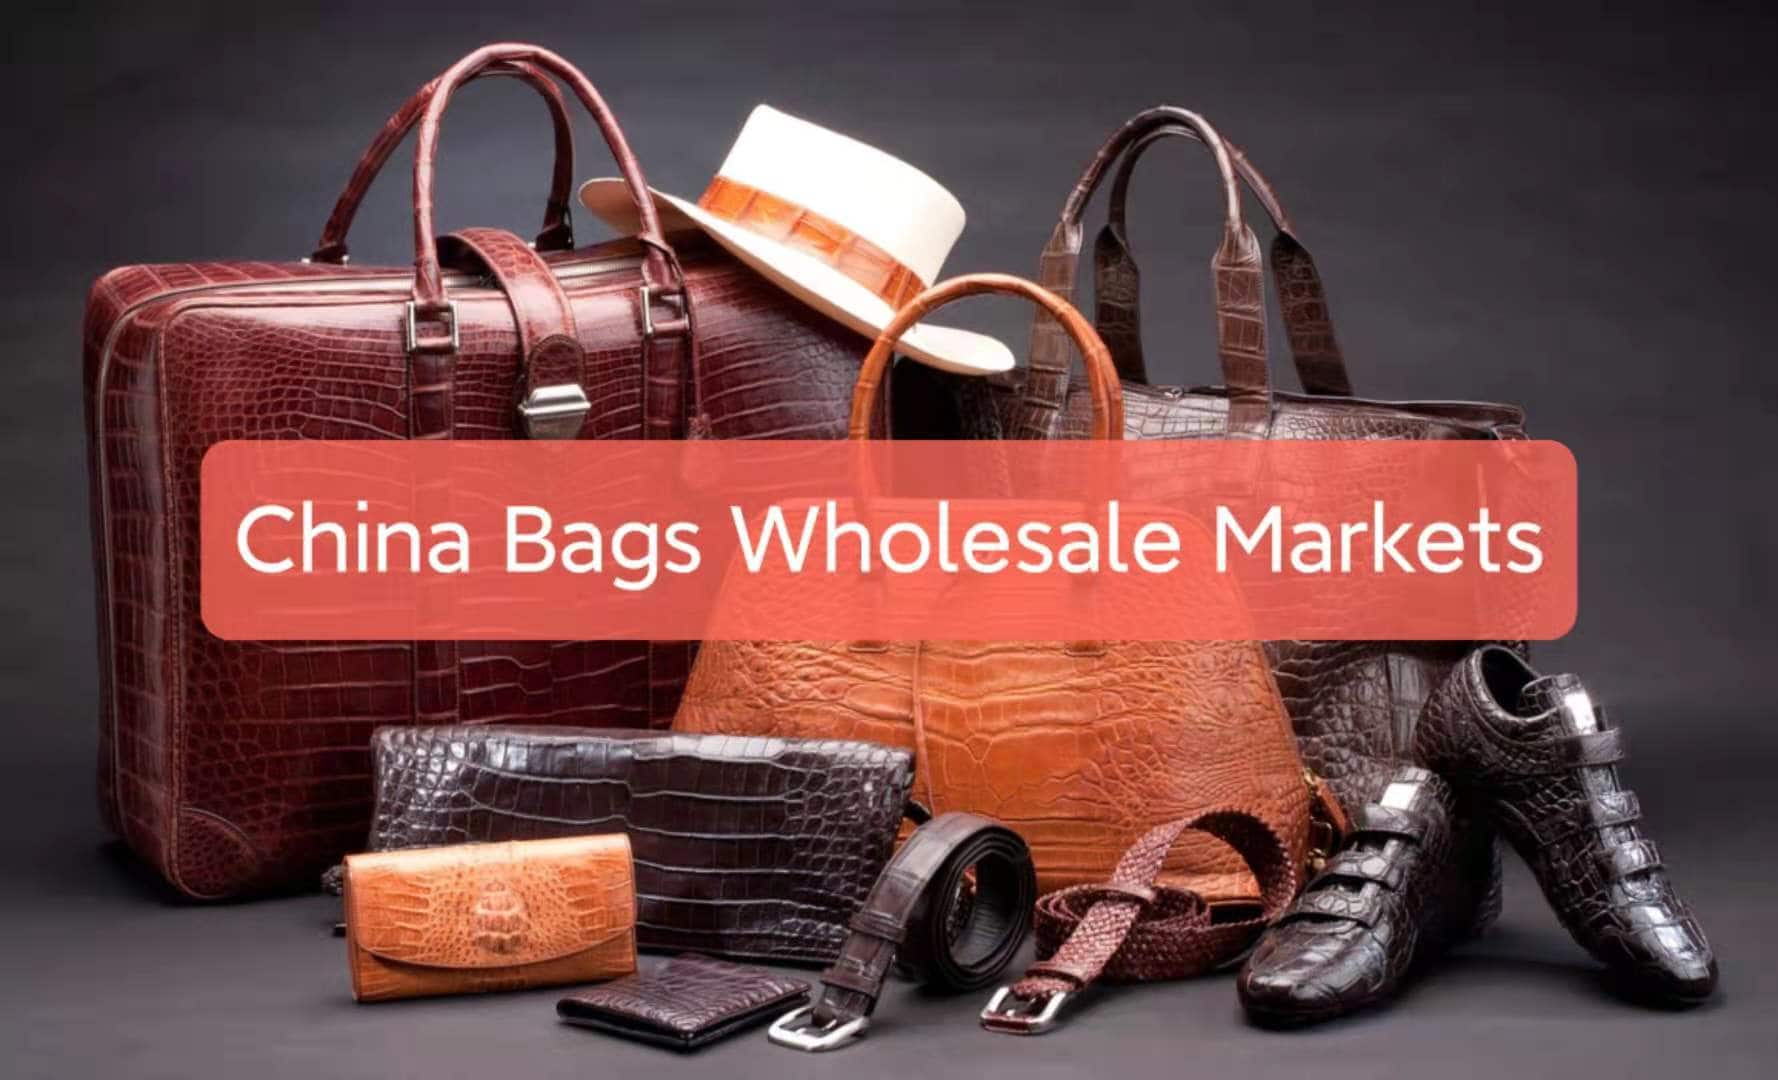 bags wholesale markets in China